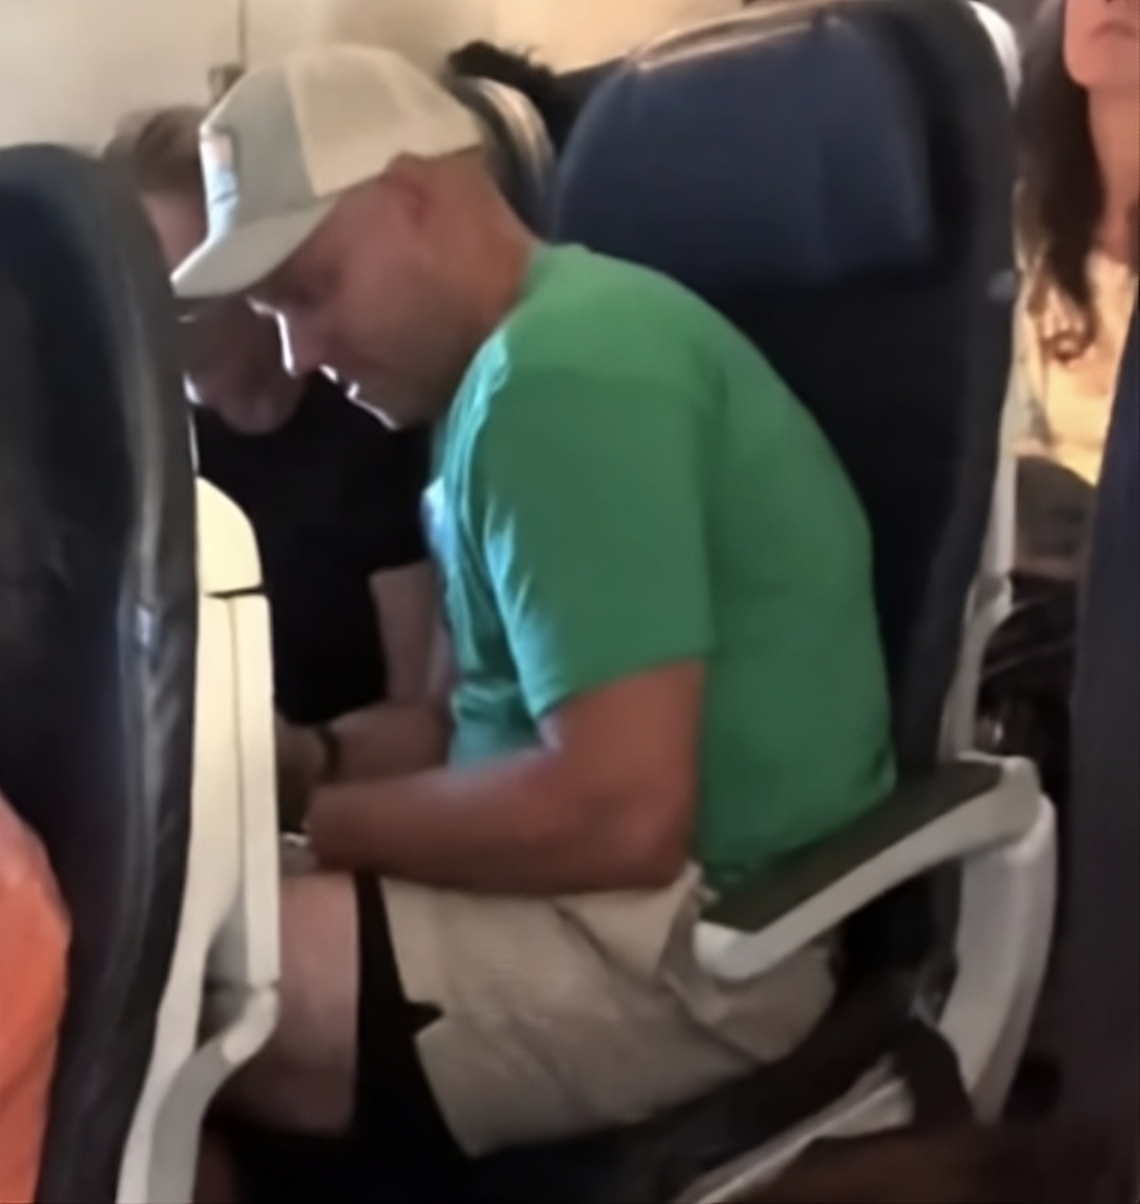 Viral video reveals cheating husband’s affair in the Mile High Club on a United Airlines flight